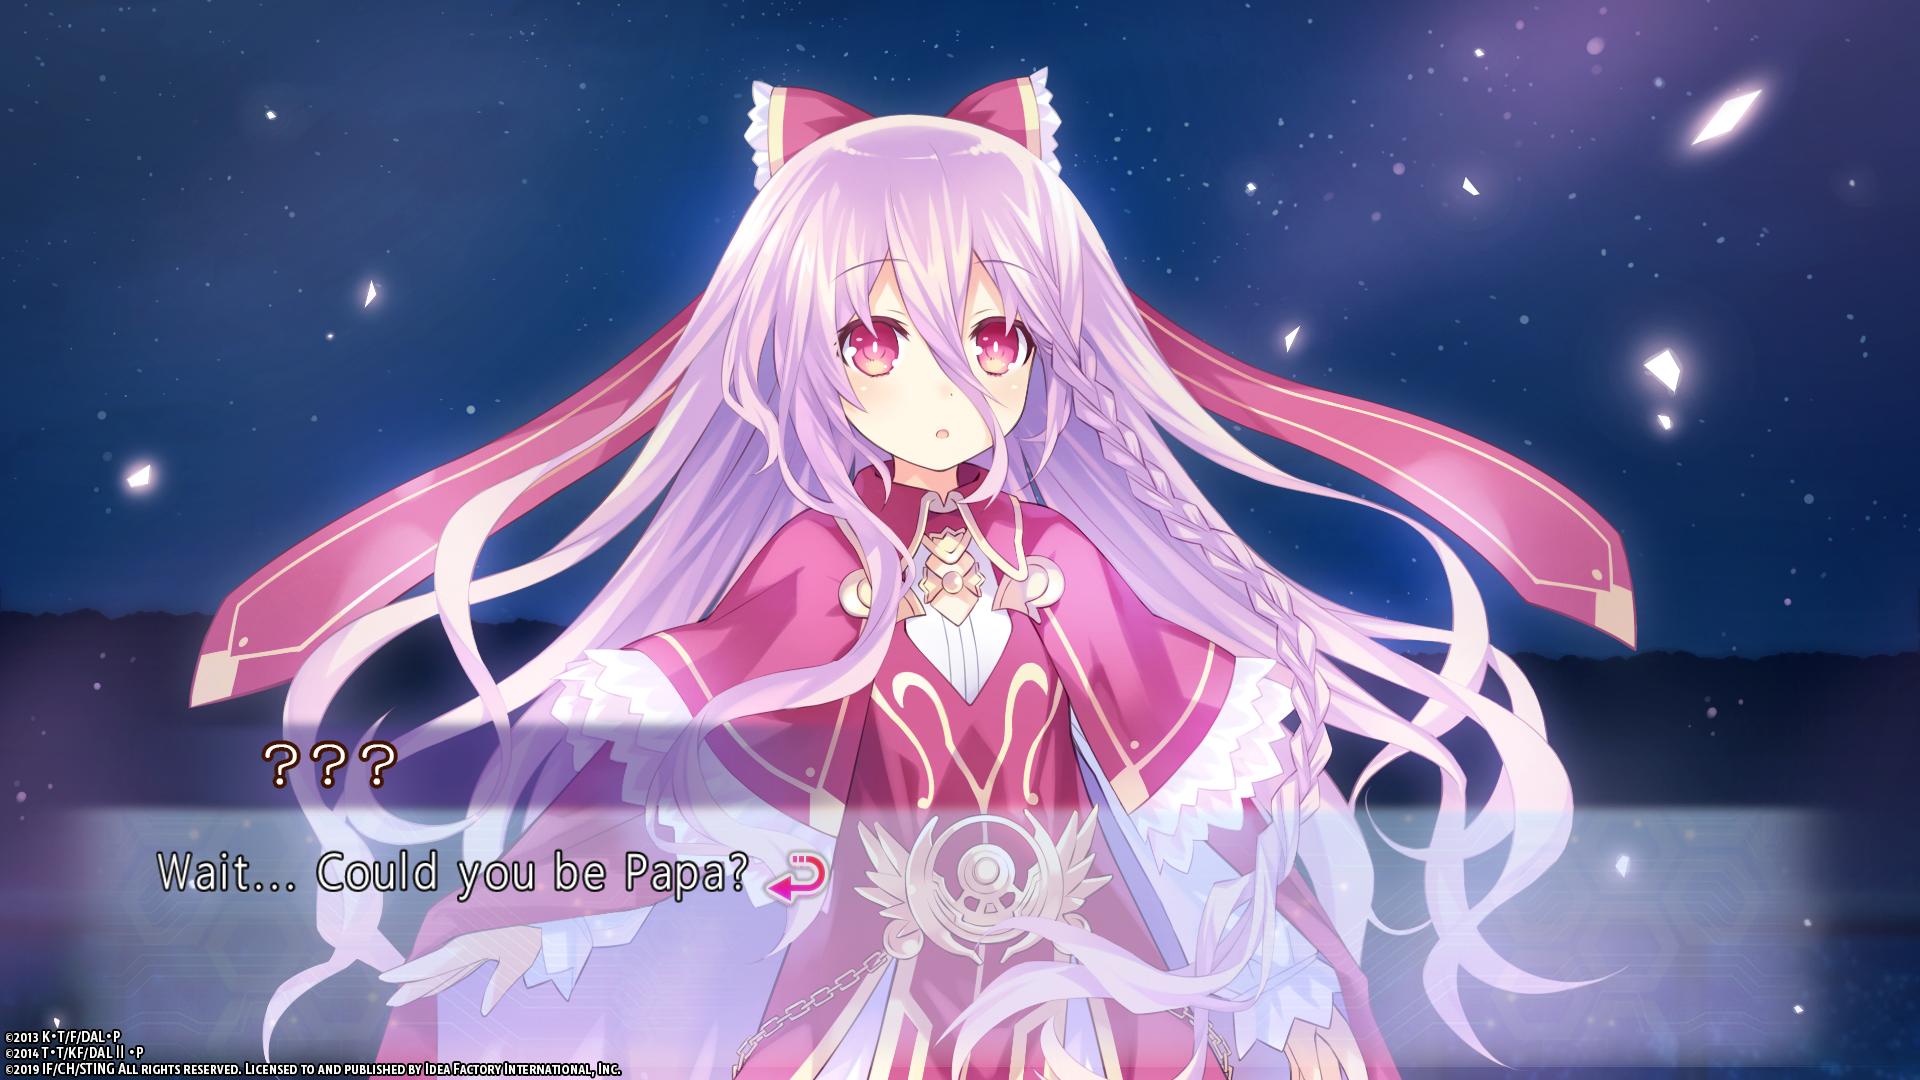 DATE A LIVE: Rio Reincarnation Heads to PlayStation 4 This June